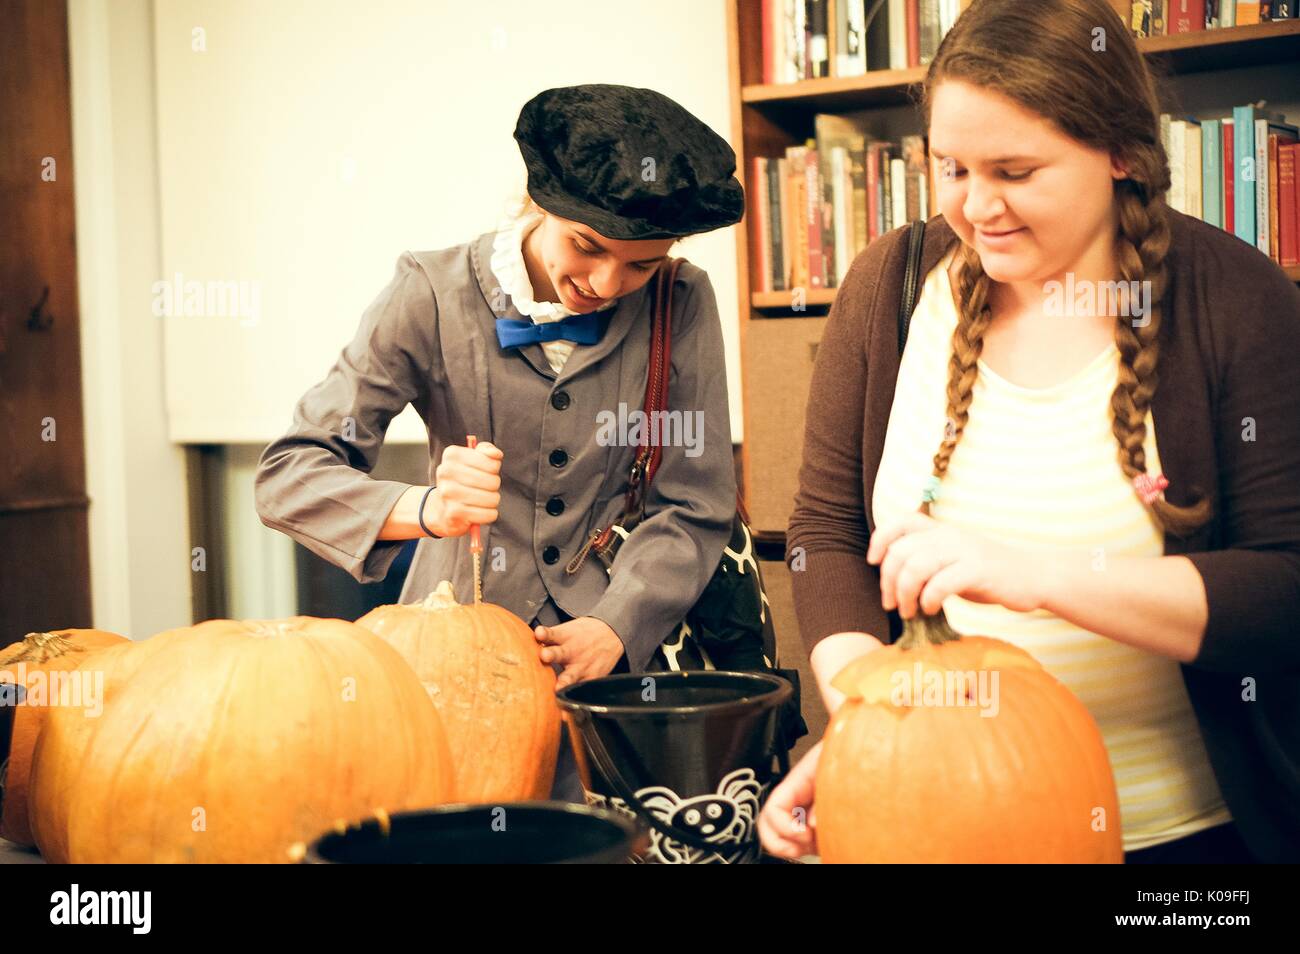 Two college students are carving pumpkins, there are several other pumpkins on the table and several black buckets to collect the scraps, one of the students is in costume wearing a buttoned up suit jacket and bow tie and a dark-colored hat, 2015. Stock Photo